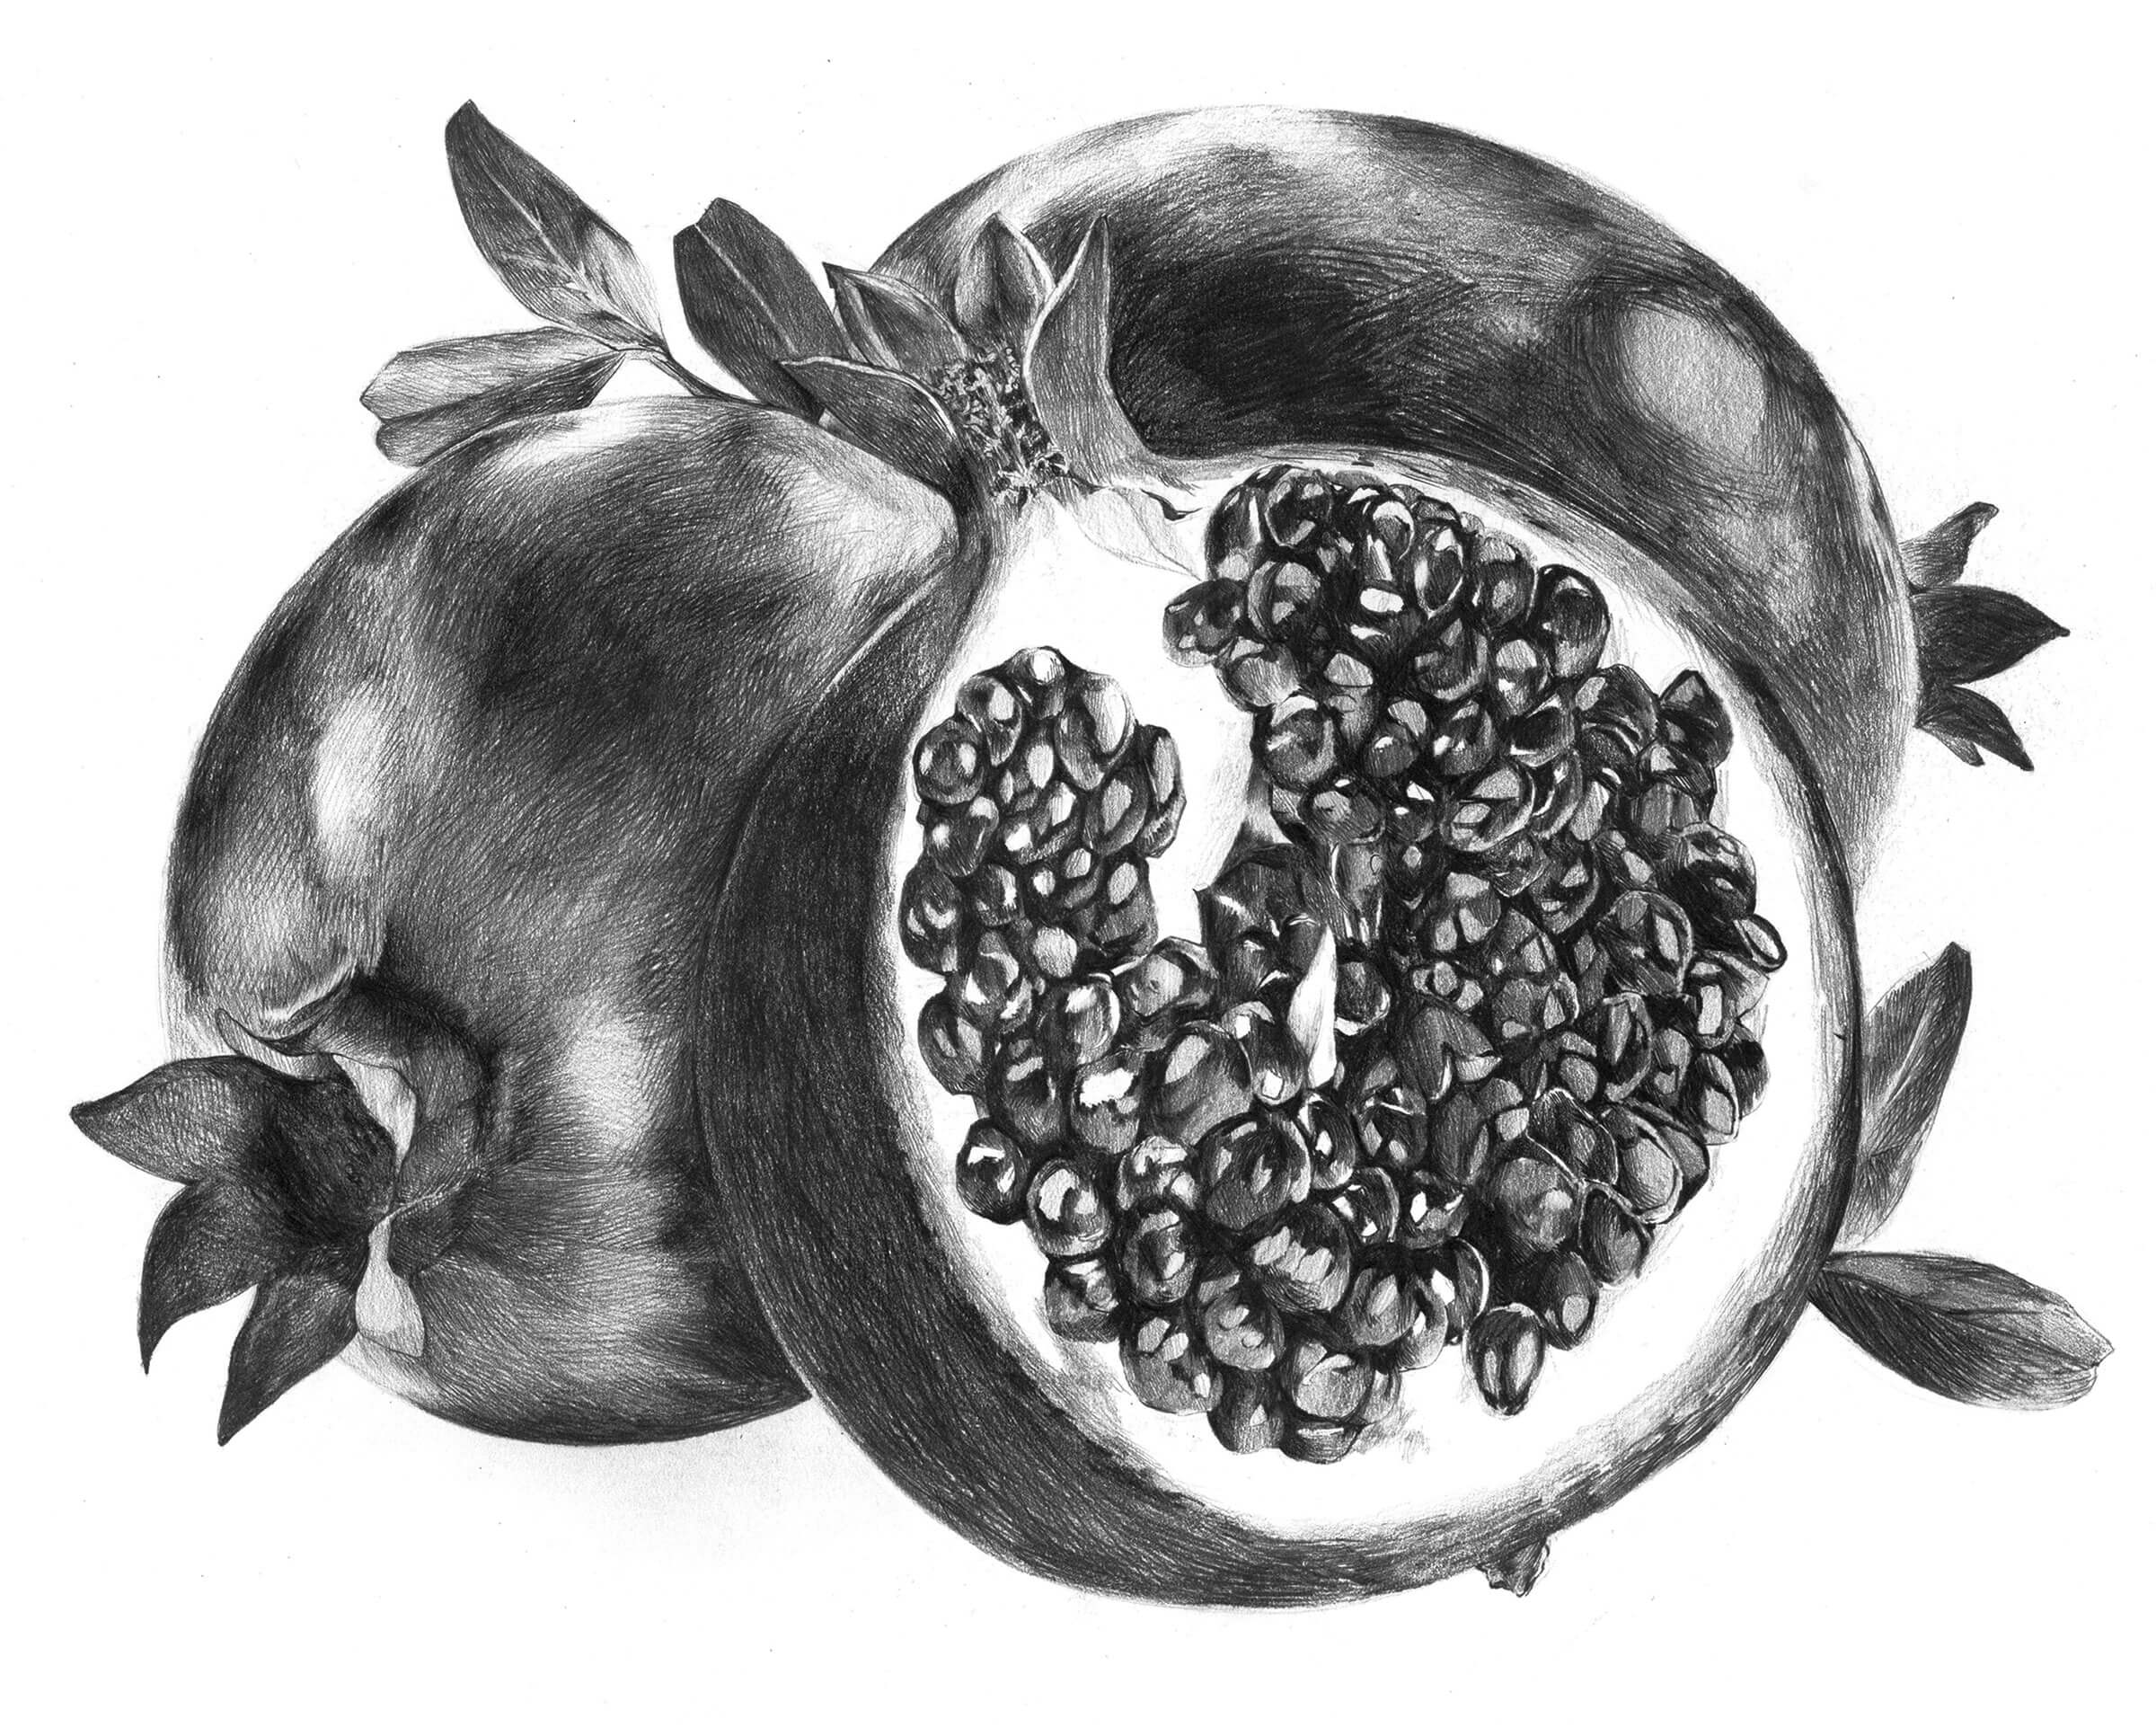 Black-and-white sketch of pomegranates, one of which is sliced in half.